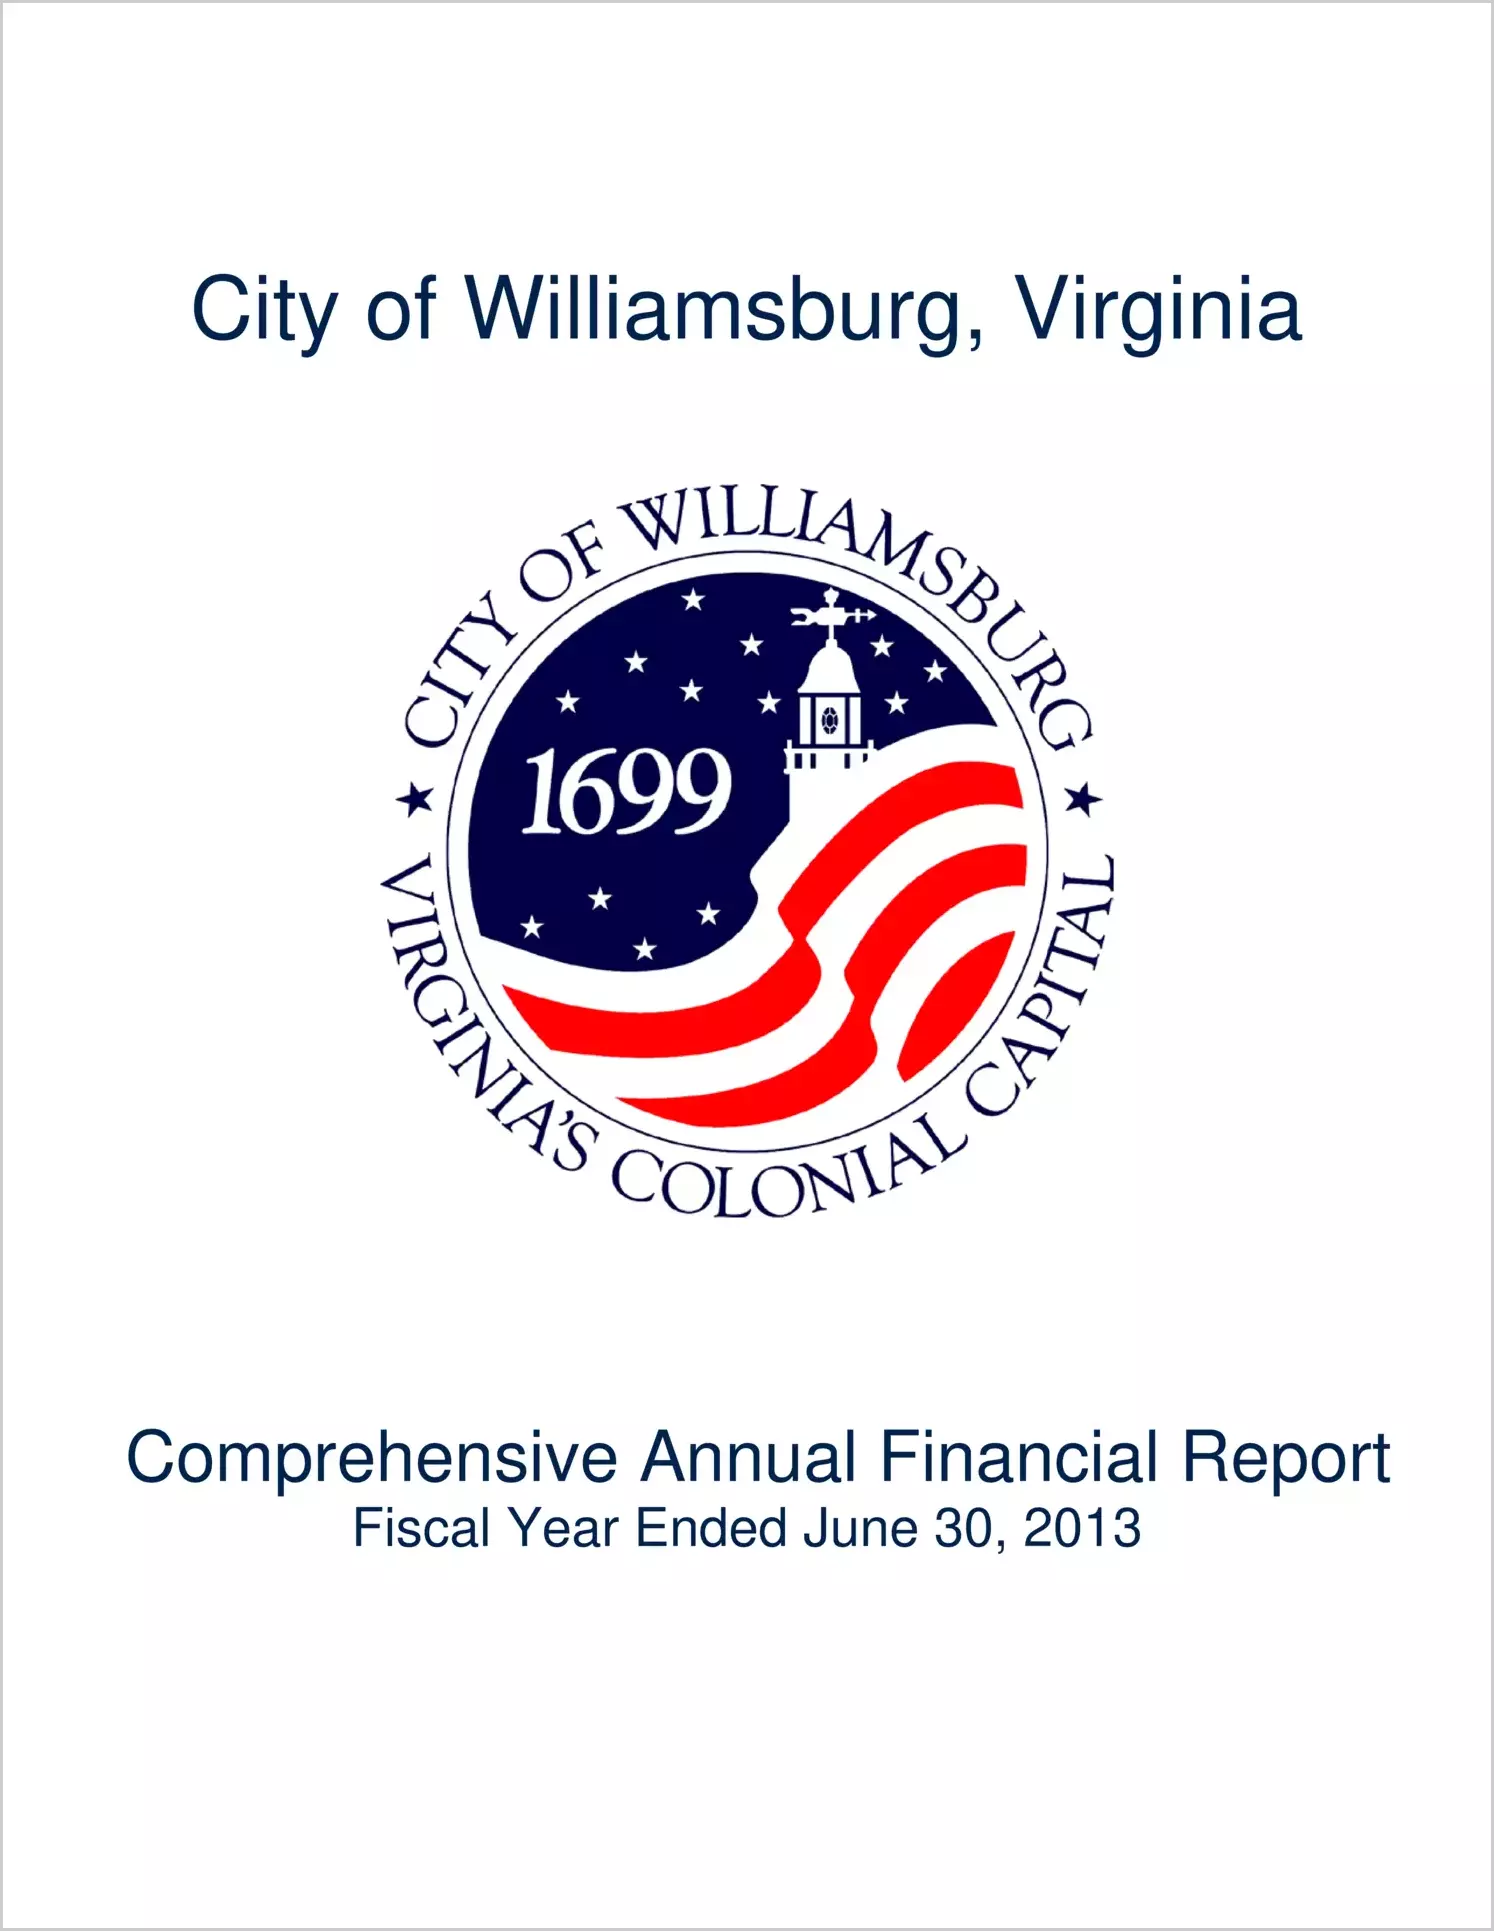 2013 Annual Financial Report for City of Williamsburg